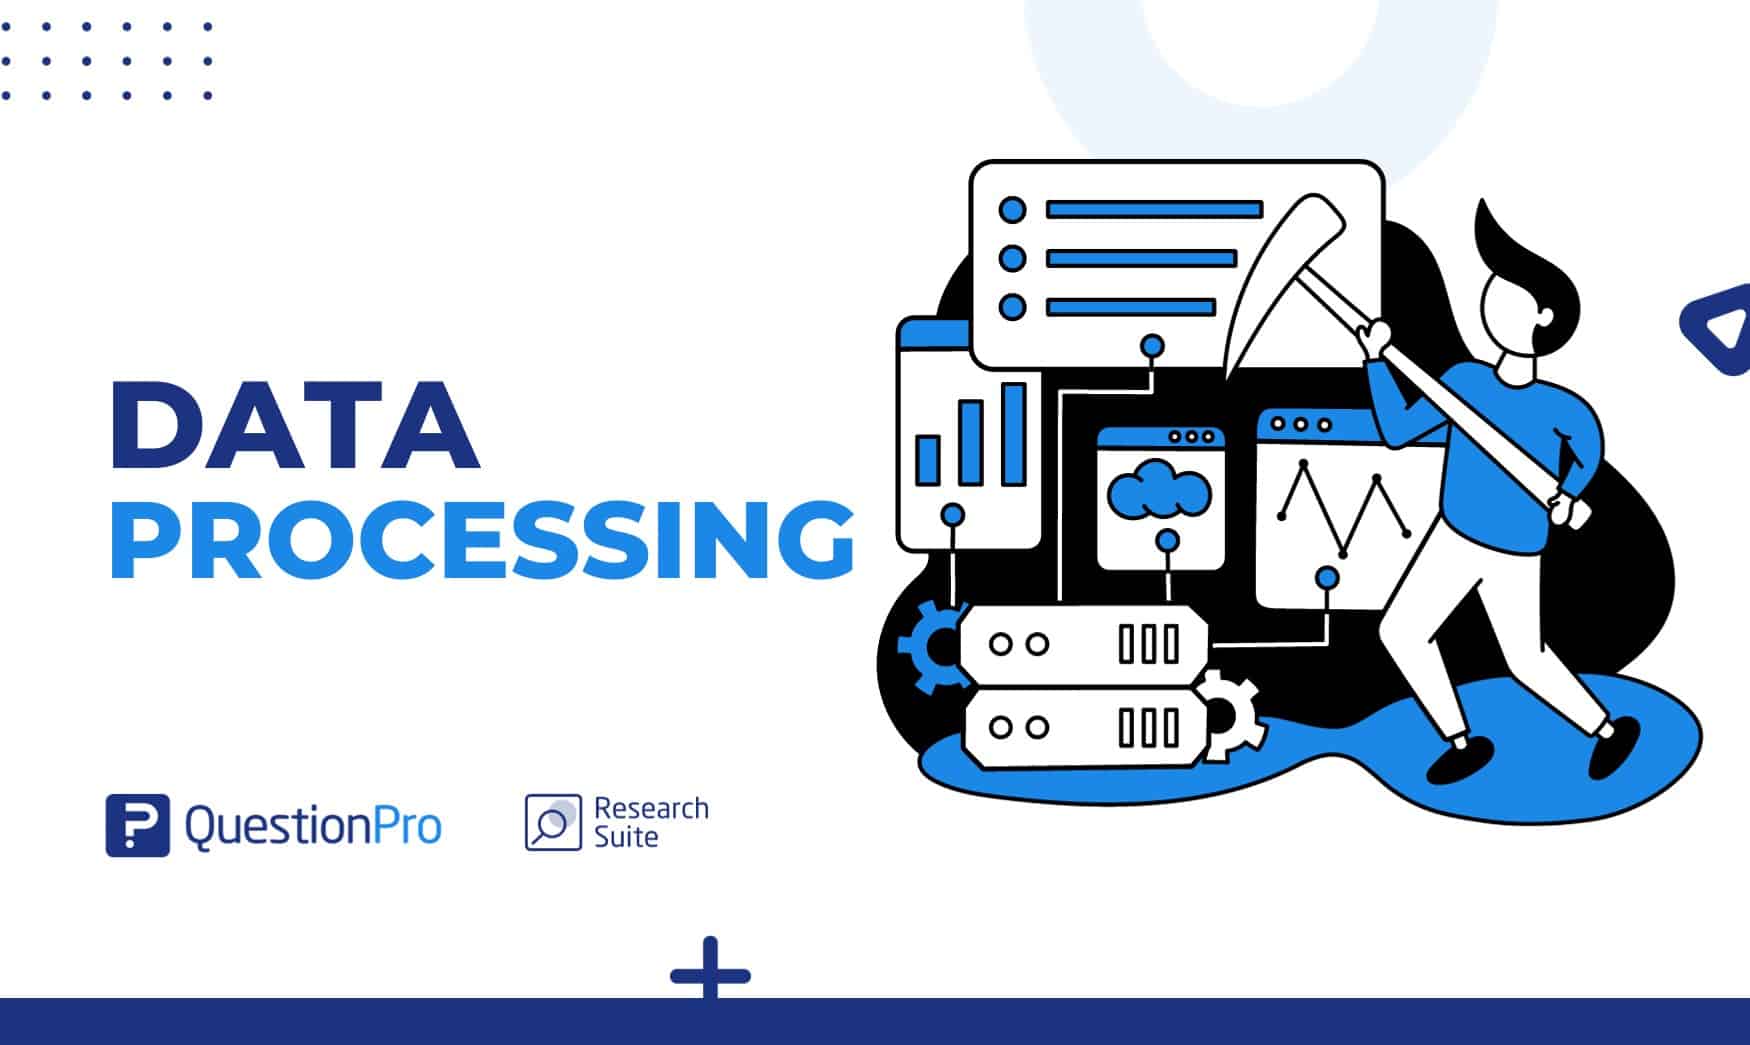 6 Stages of Data Processing - Data Processing Services Guide by